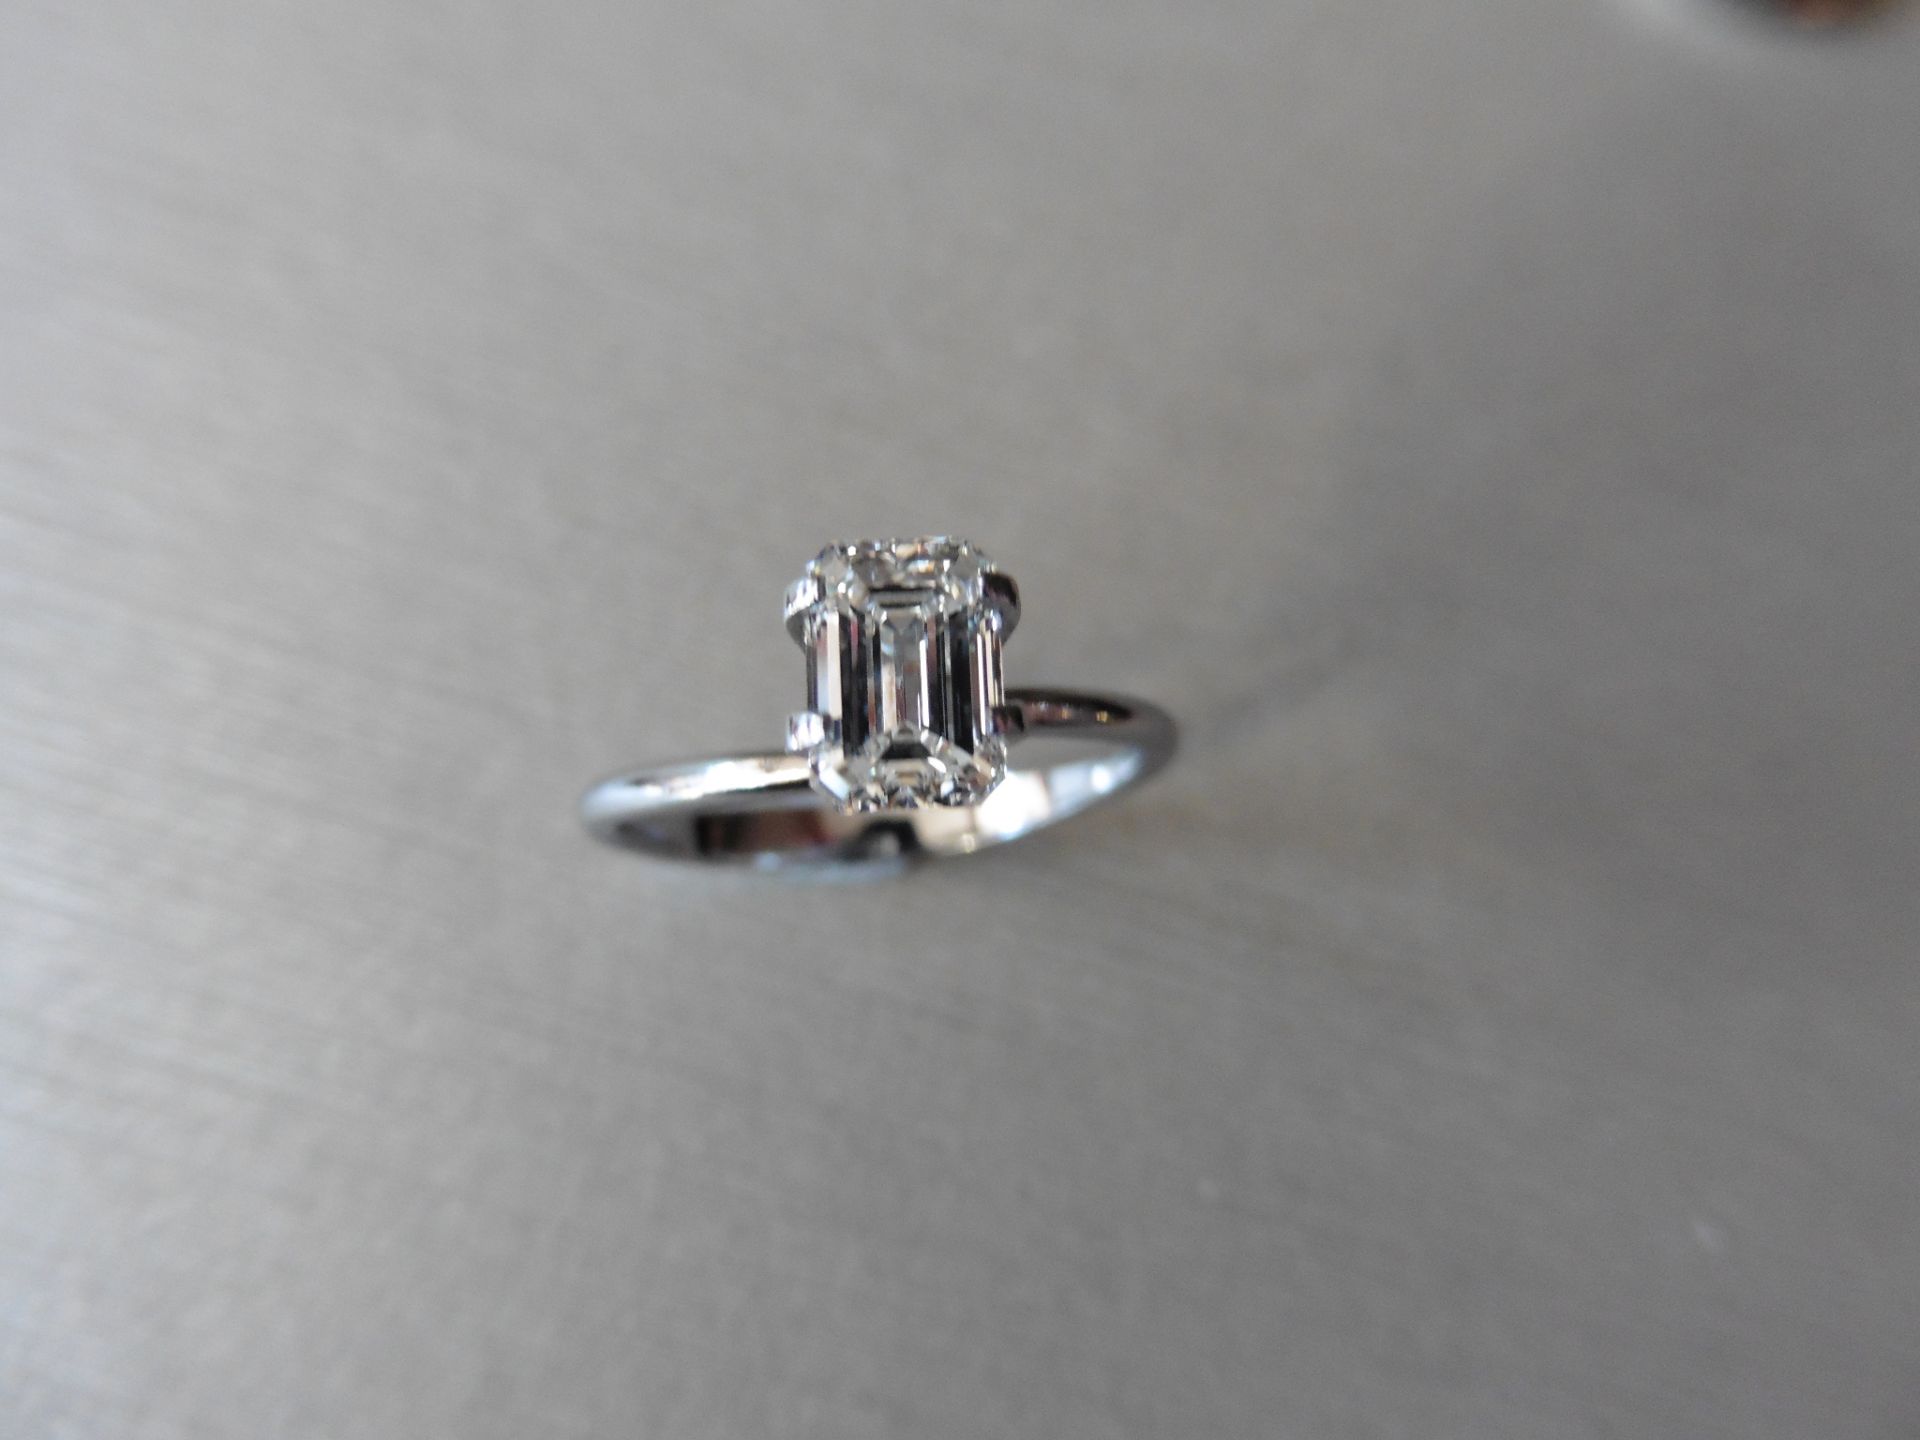 1.00ct single emerald cut diamond G colour VS1 clarity. 6.74 x 4.76 x 3.18. Suitable for mounting in - Image 4 of 6